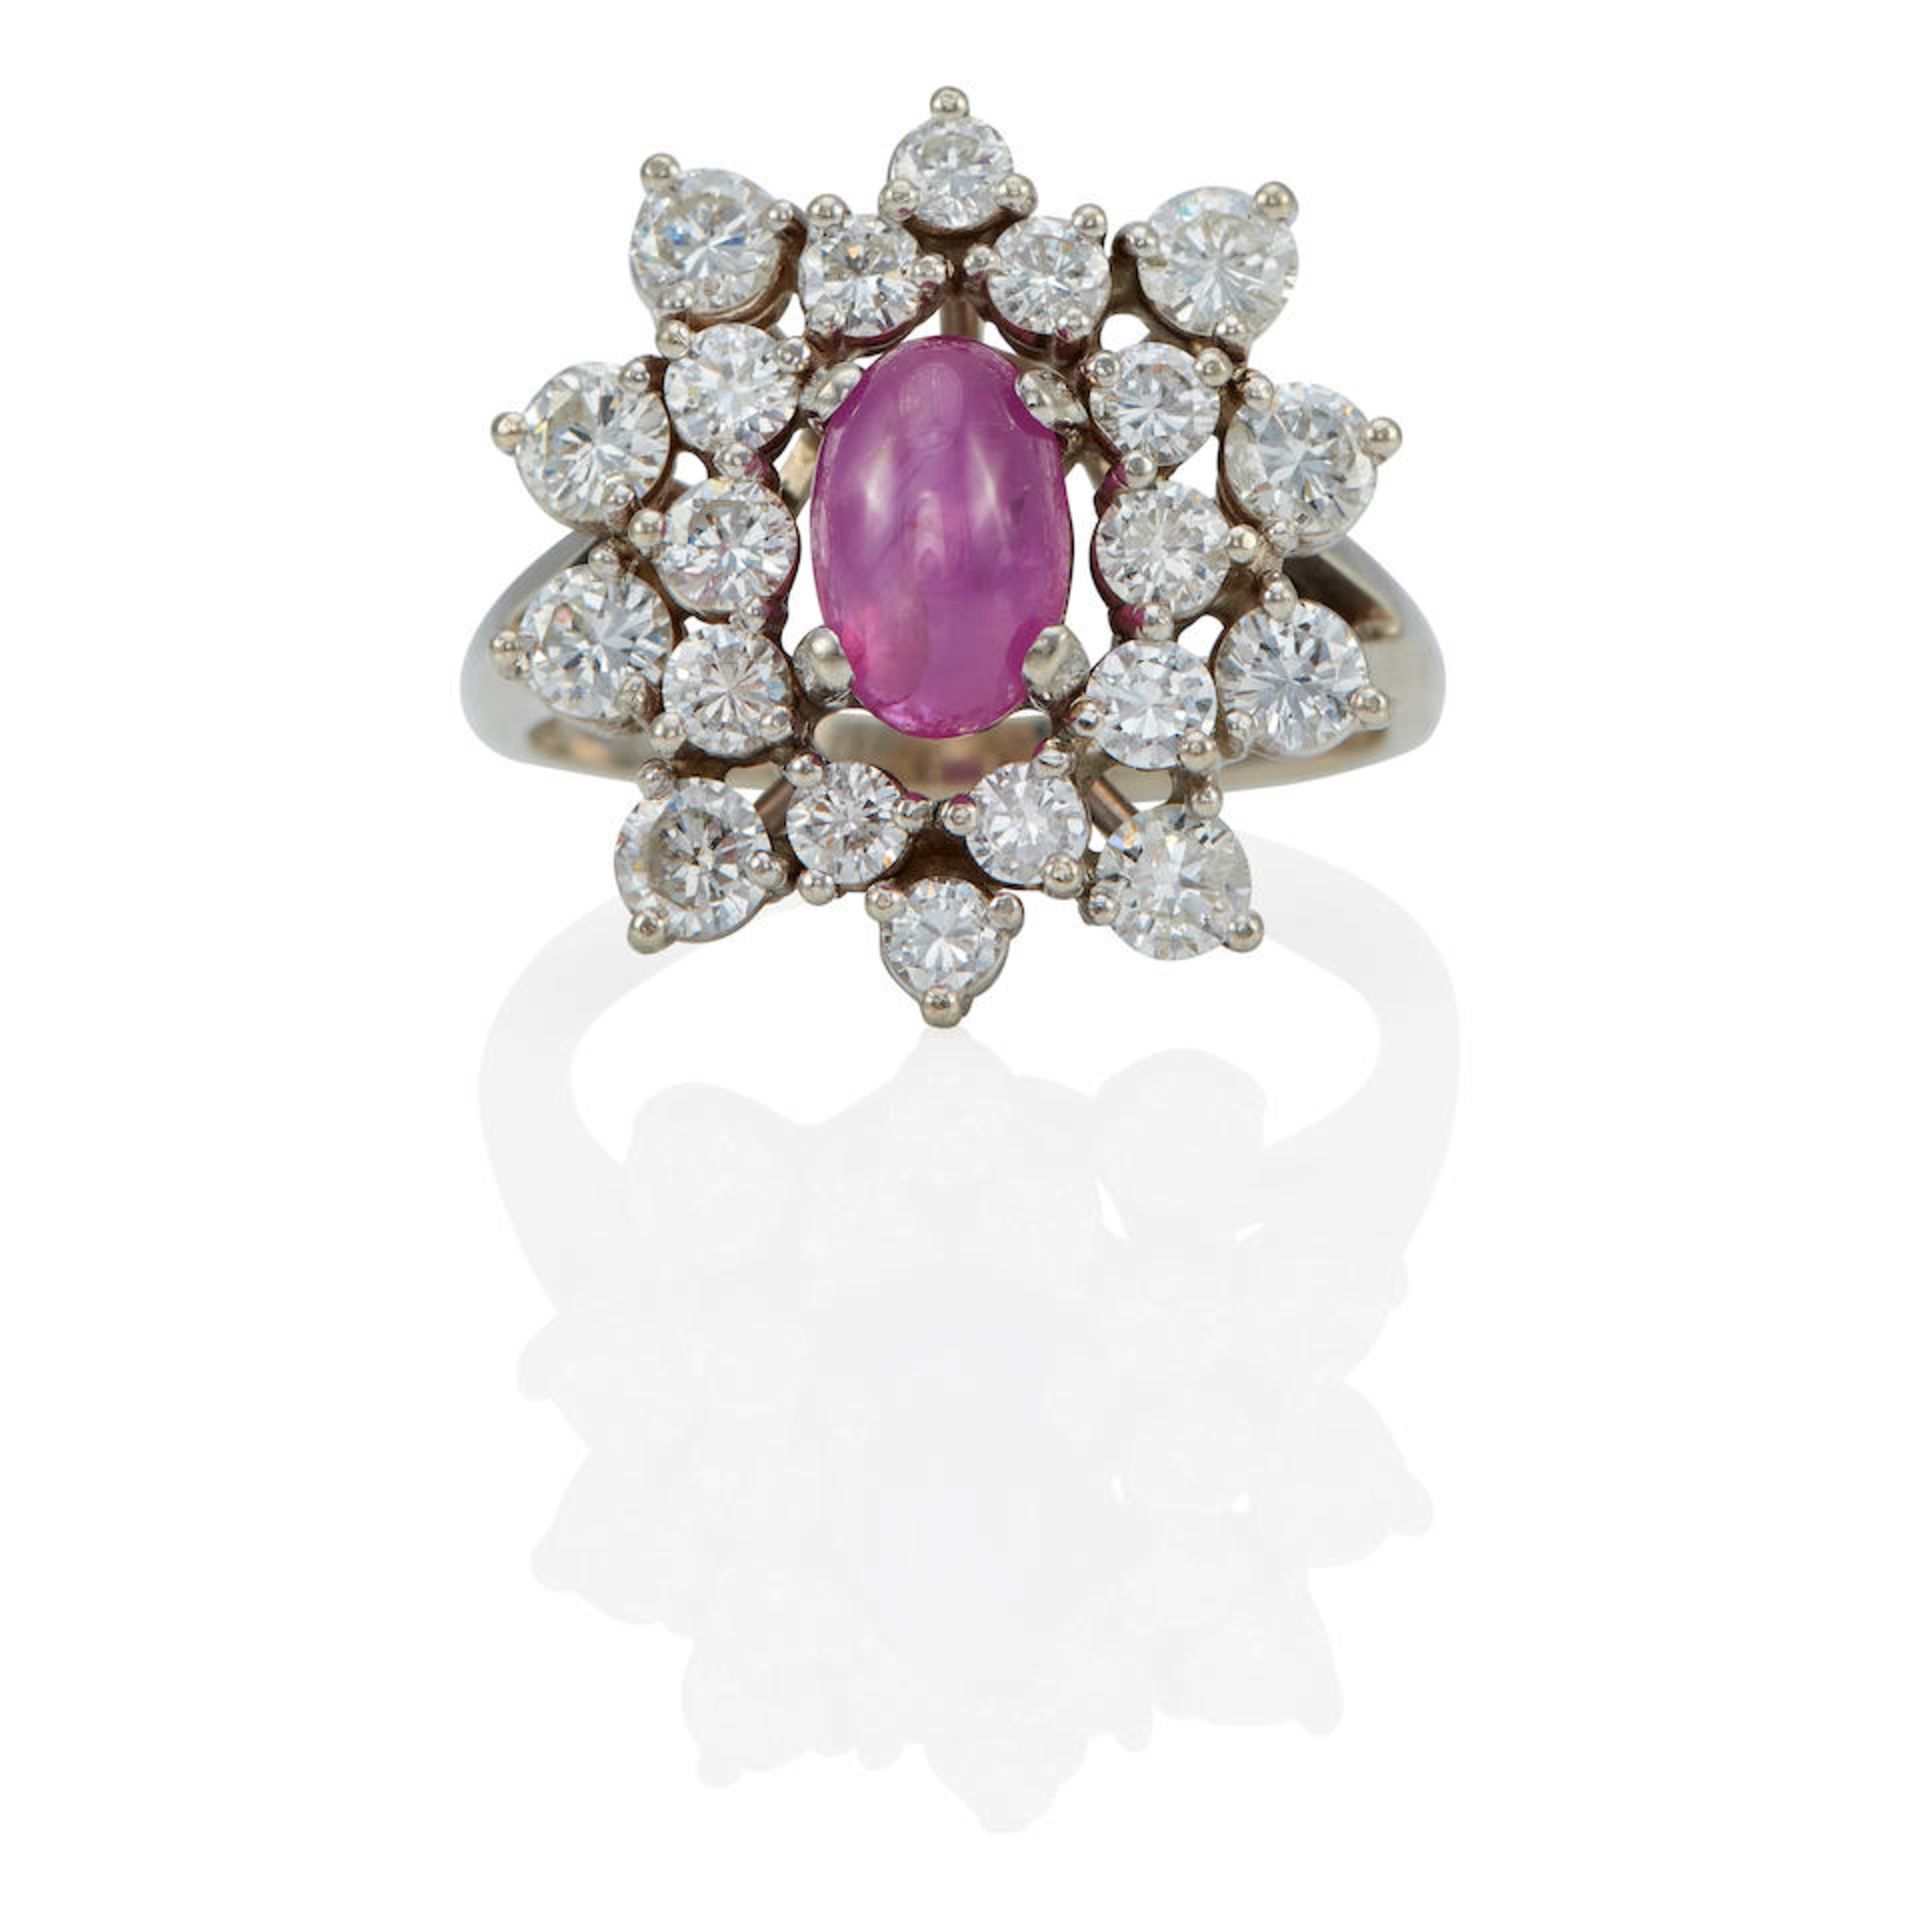 A 14K WHITE GOLD, STAR RUBY, AND DIAMOND RING